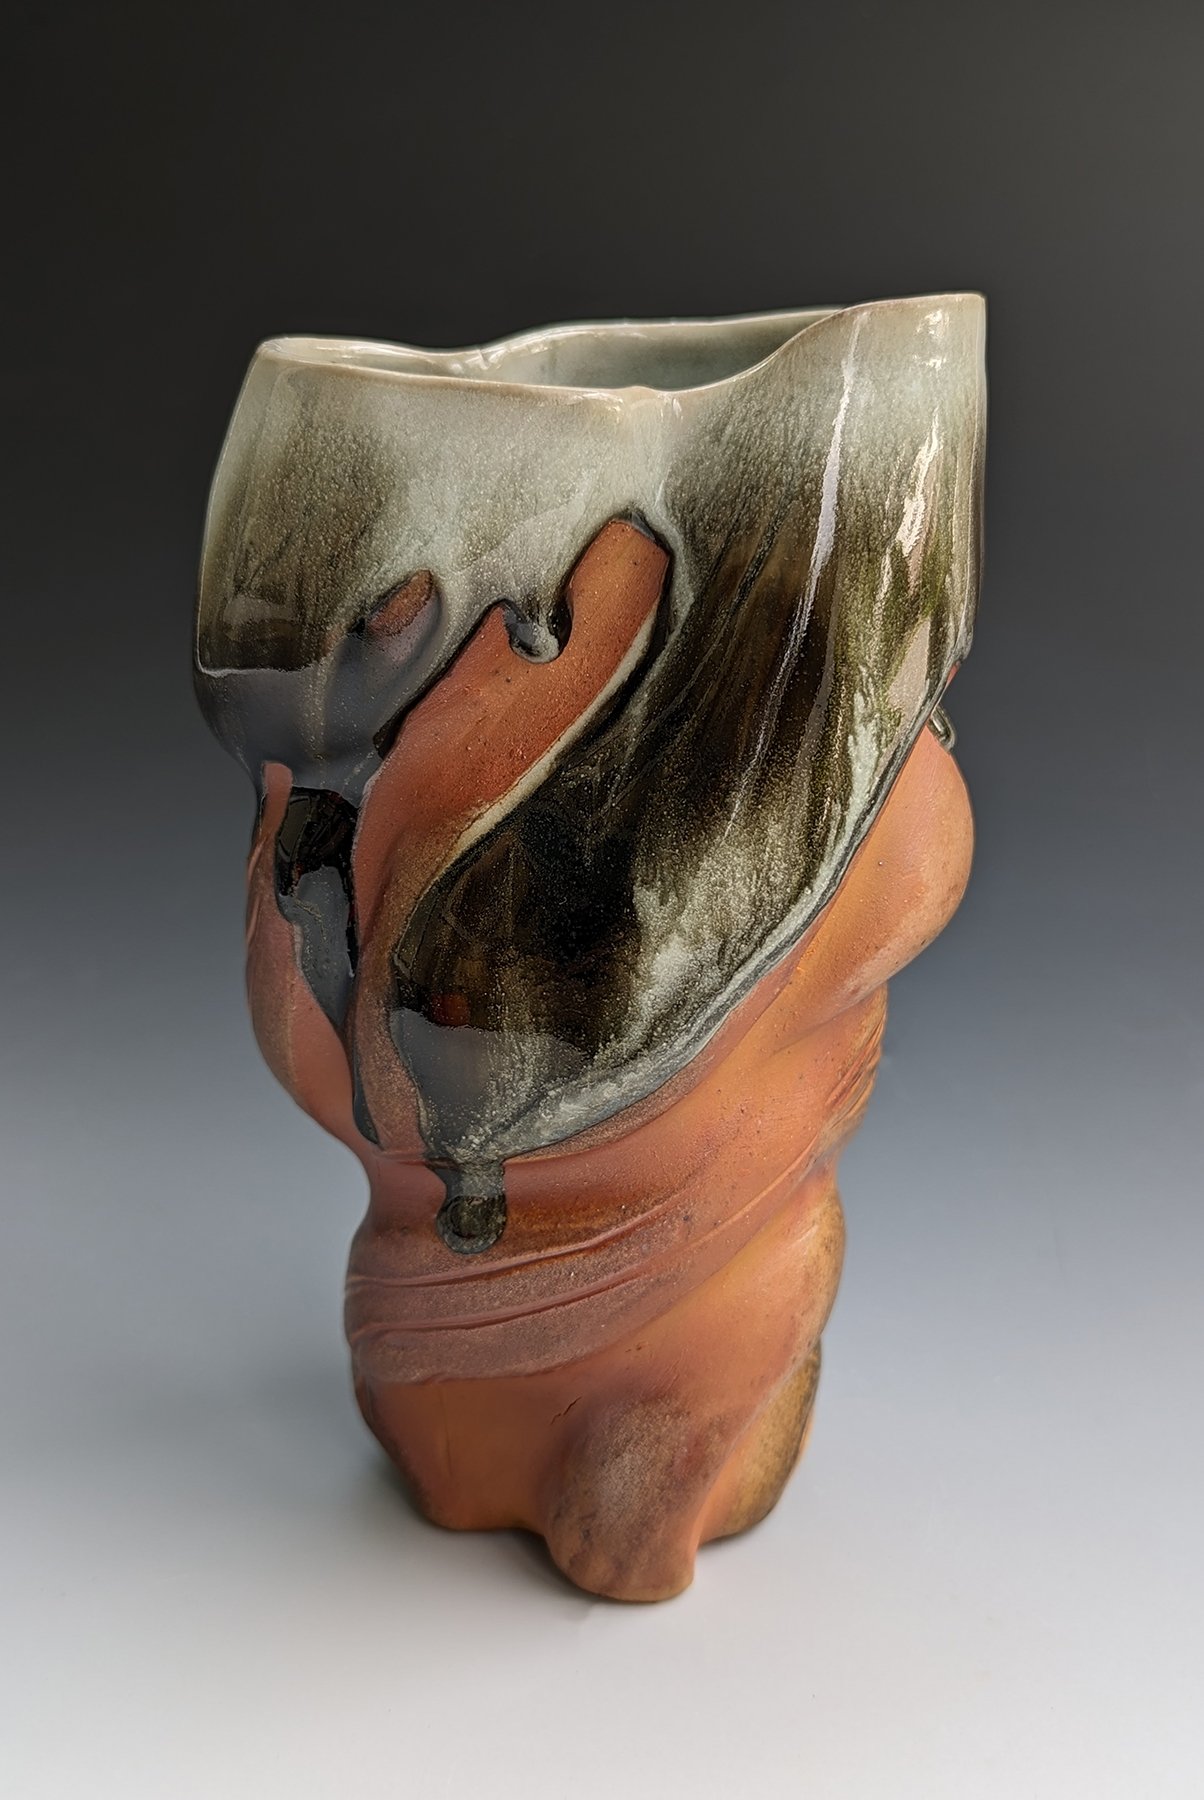    Fire and Ice,   wood-fired ceramics, 8 x 5 x 4 inches 